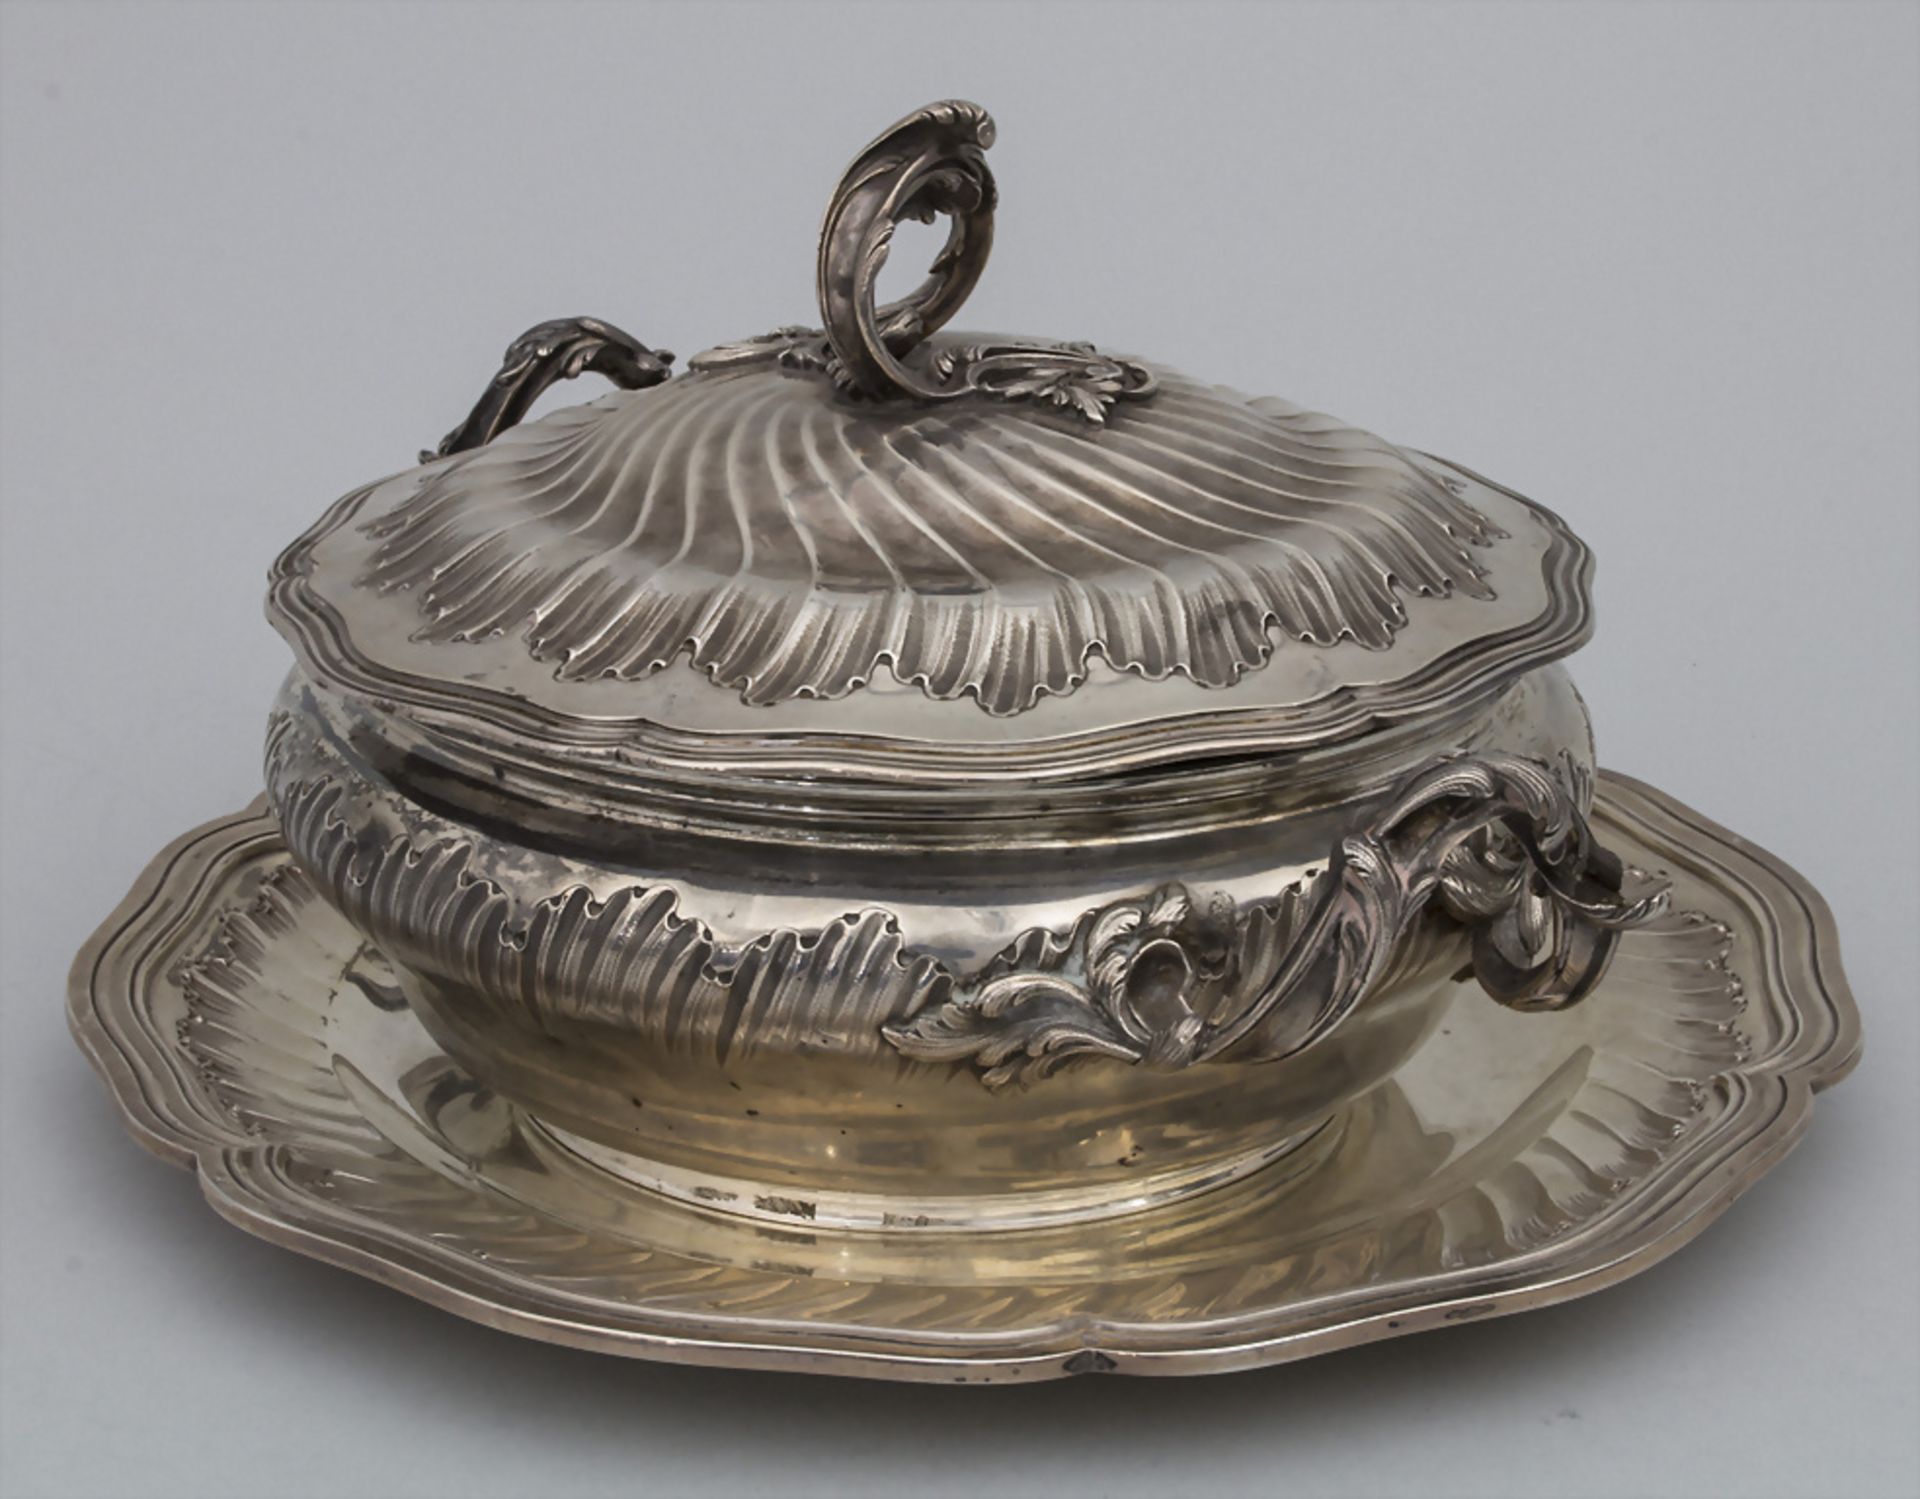 Legumier / Wöchnerinnenschüssel / A silver vegetable tureen with lining and cover, Paris, um 1900 - Image 3 of 13